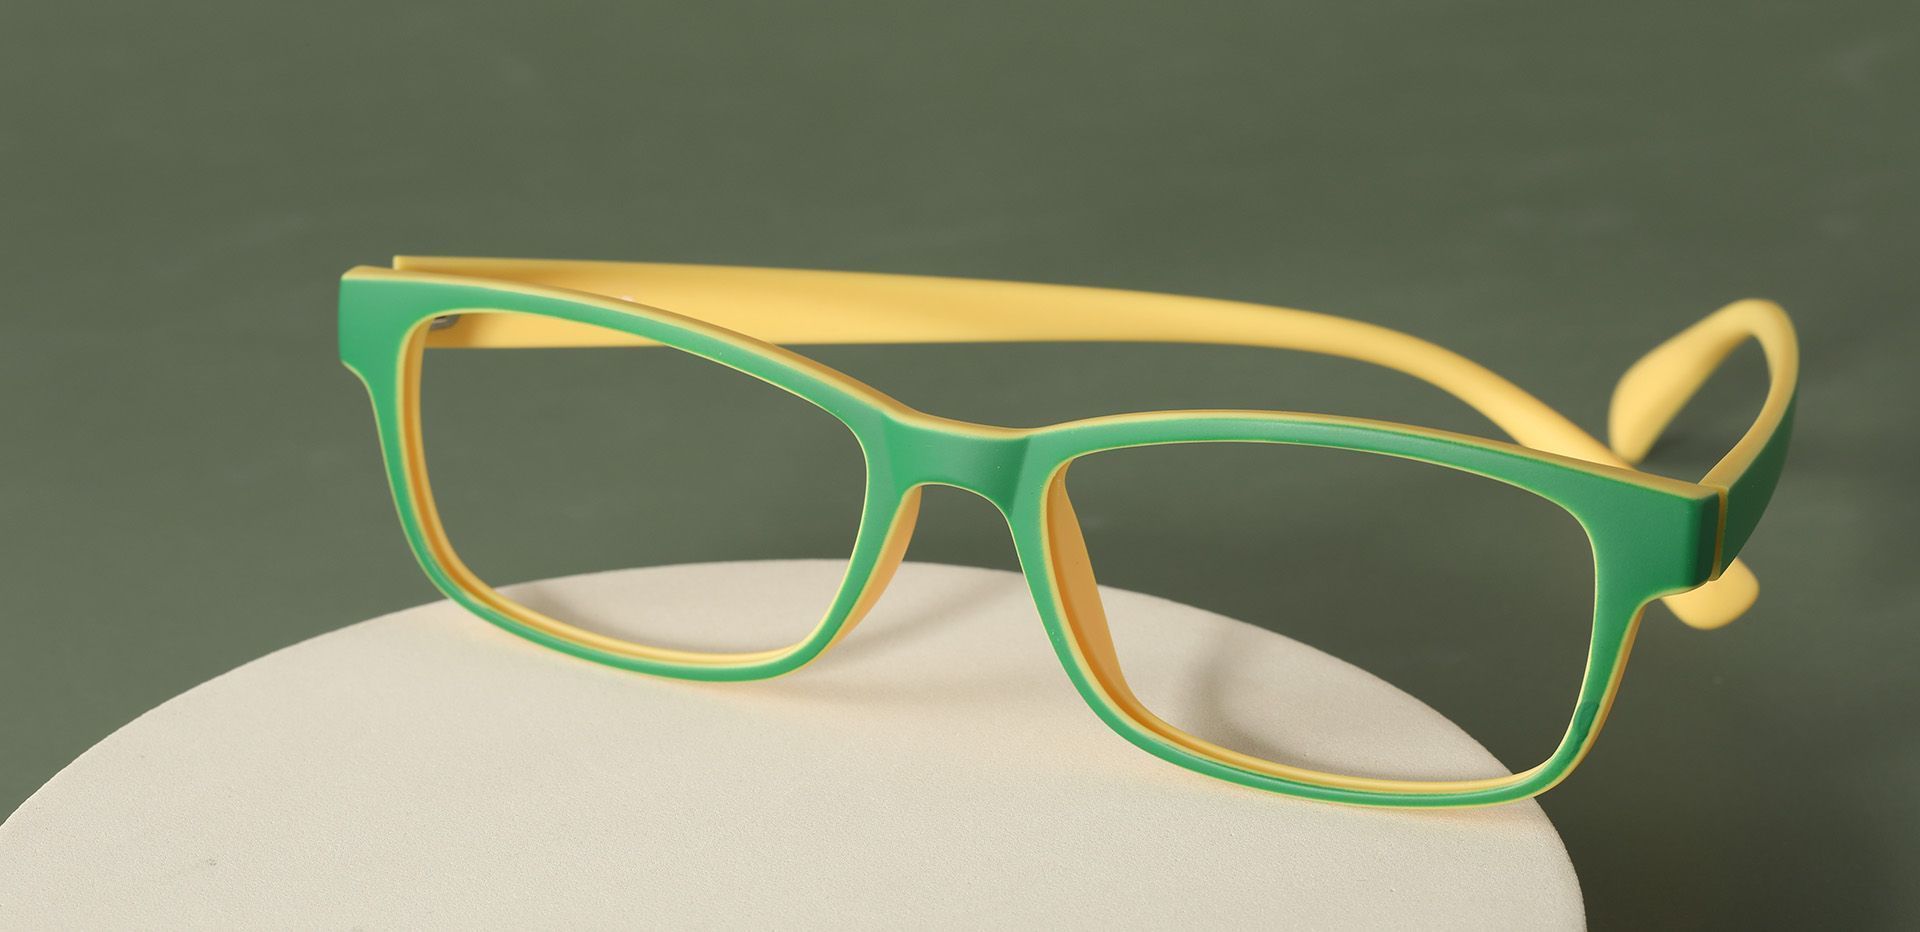 Cottage Rectangle Non-Rx Glasses - Green